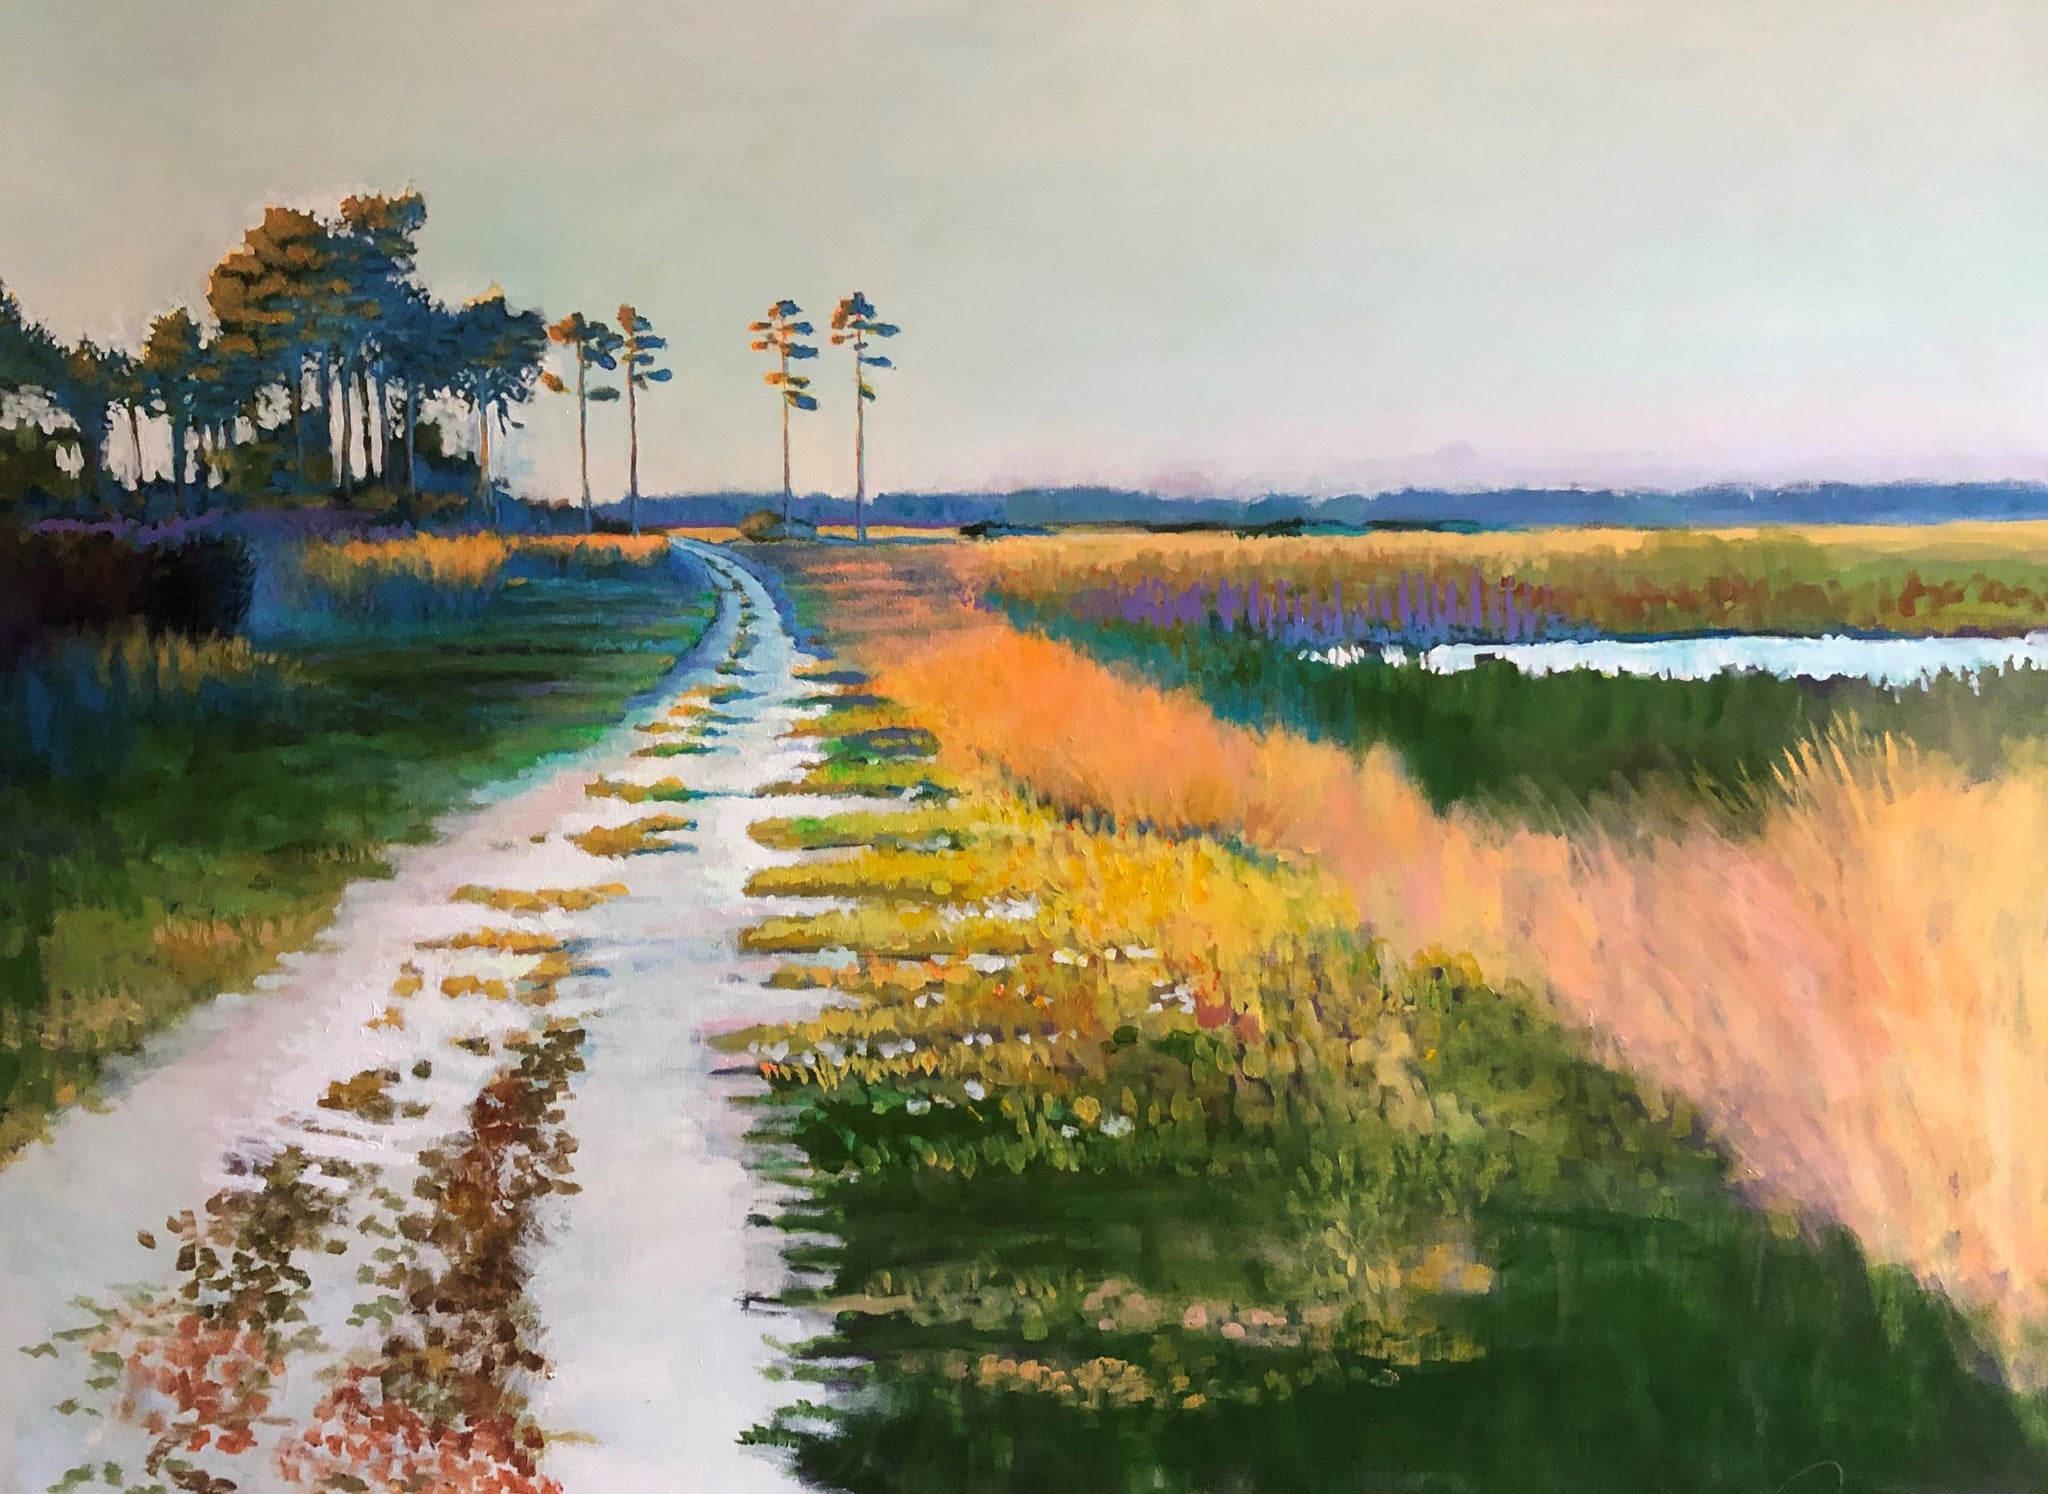 Late Afternoon Colors at Fenwick Island Preserve  48 X 60"